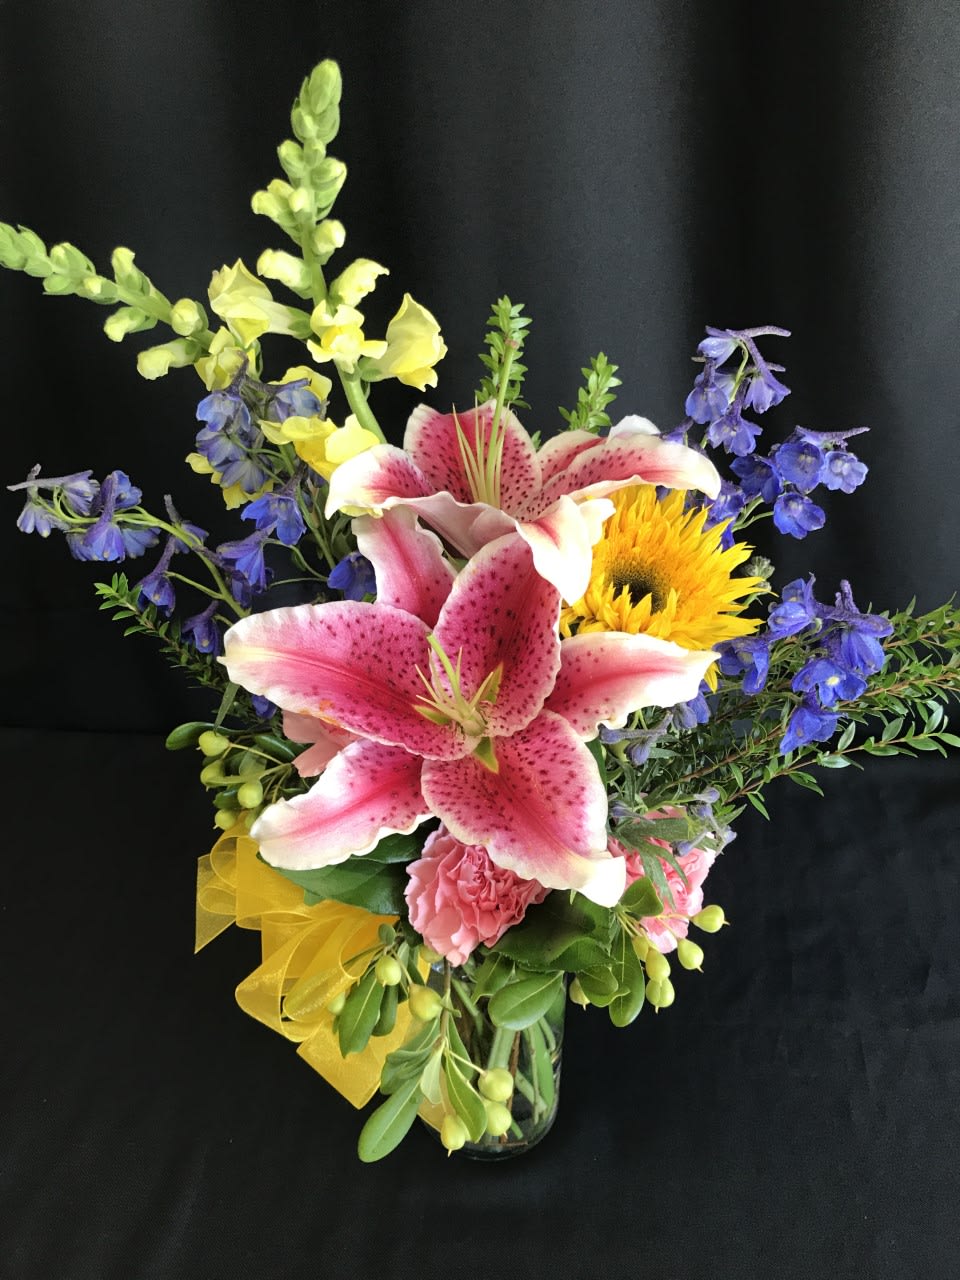 One stargazer lily and some companion flowers in a small vase.
Excellent choice